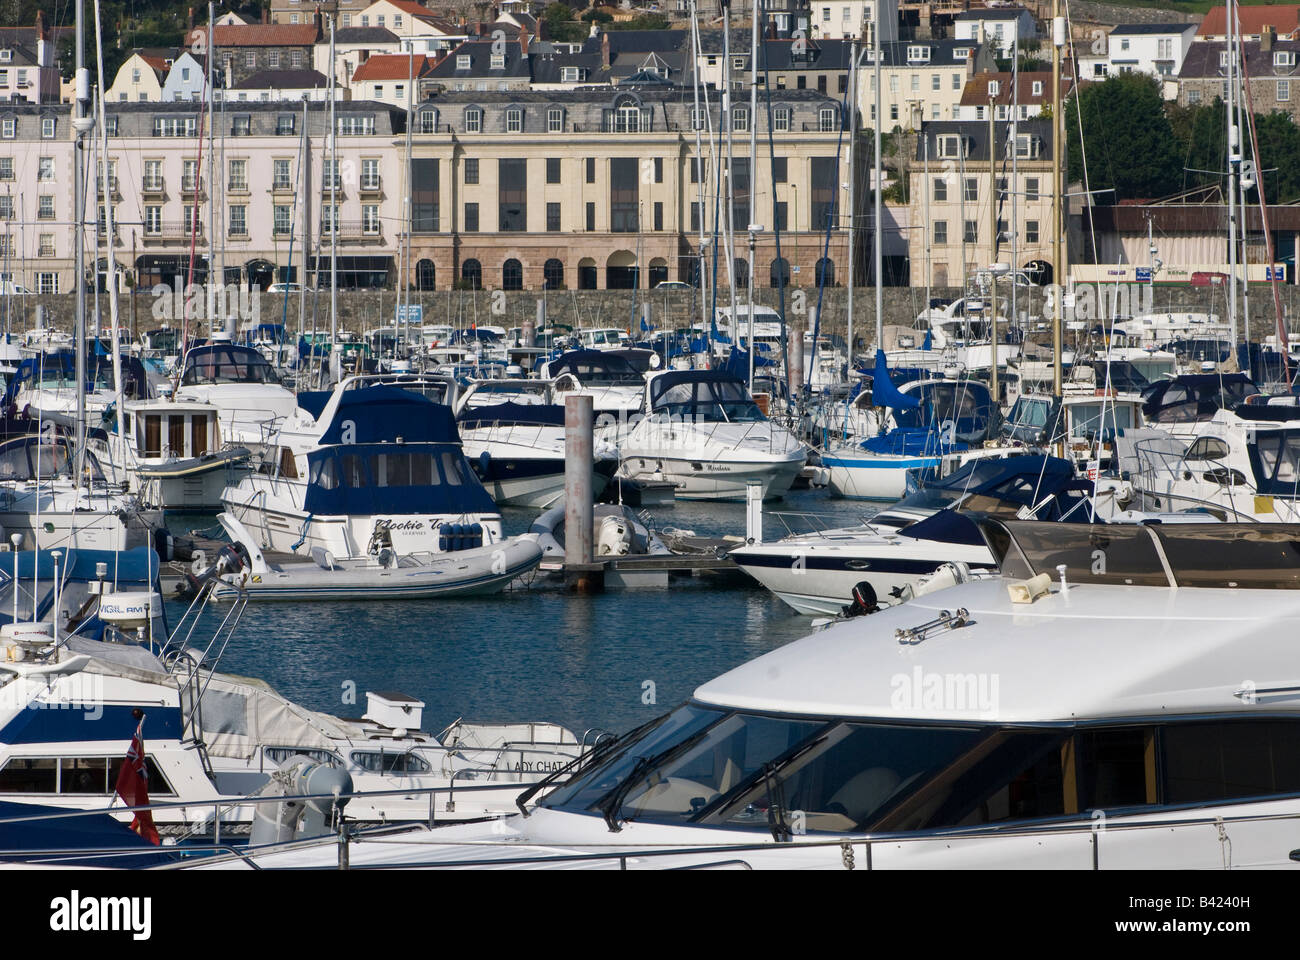 Financial centre and marina, St Peter Port, Guernsey. Stock Photo